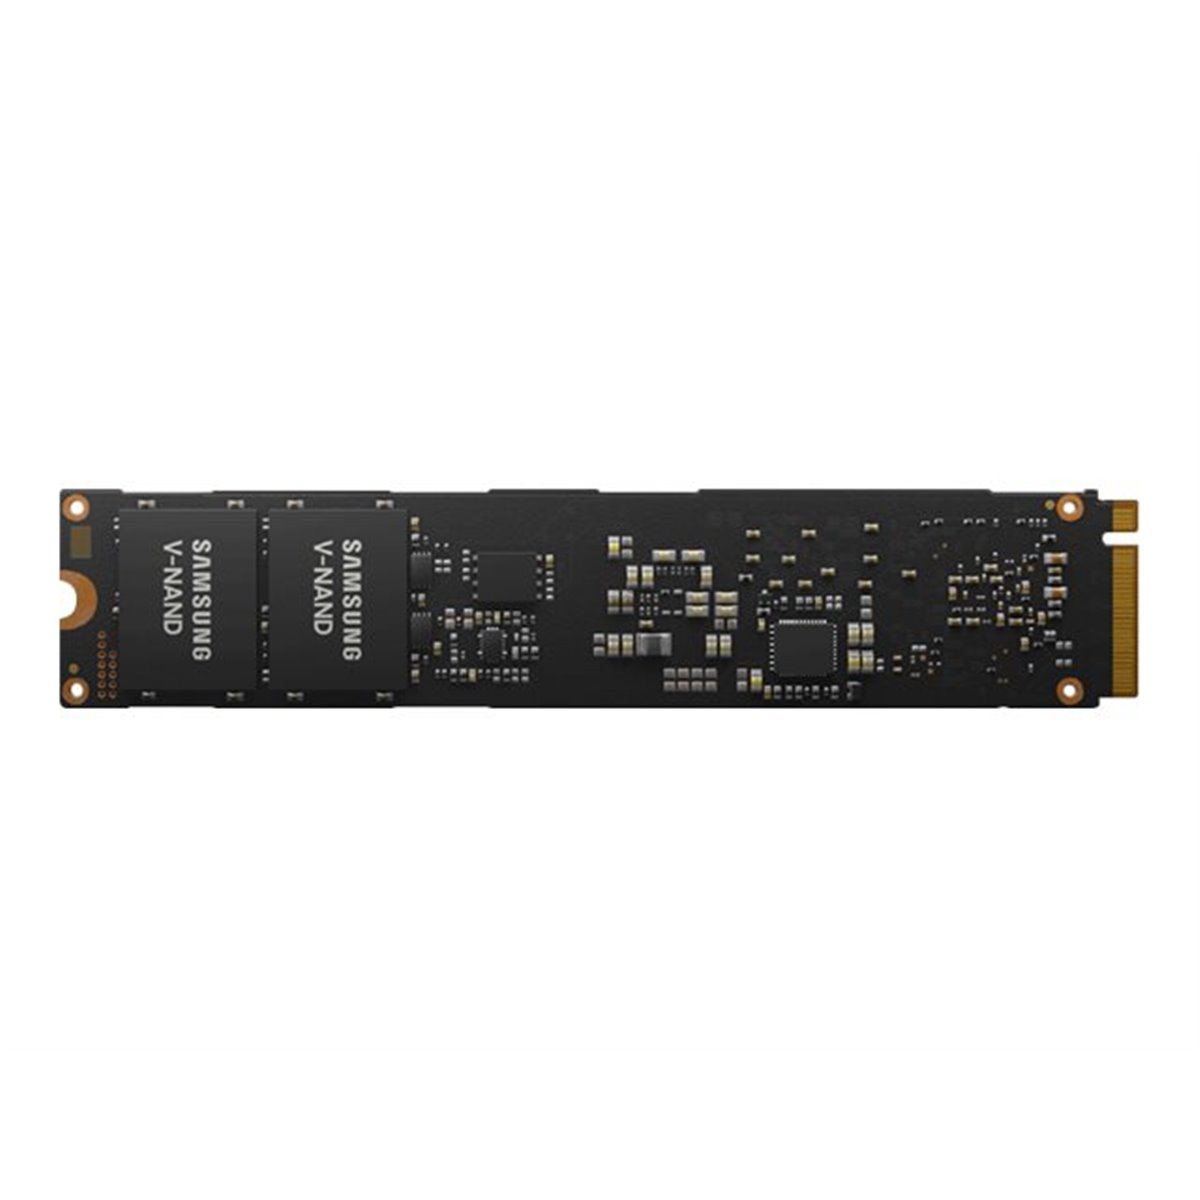 Samsung PM9A3 3.84TB SSD M.2 bulk - Solid State Disk - NVMe